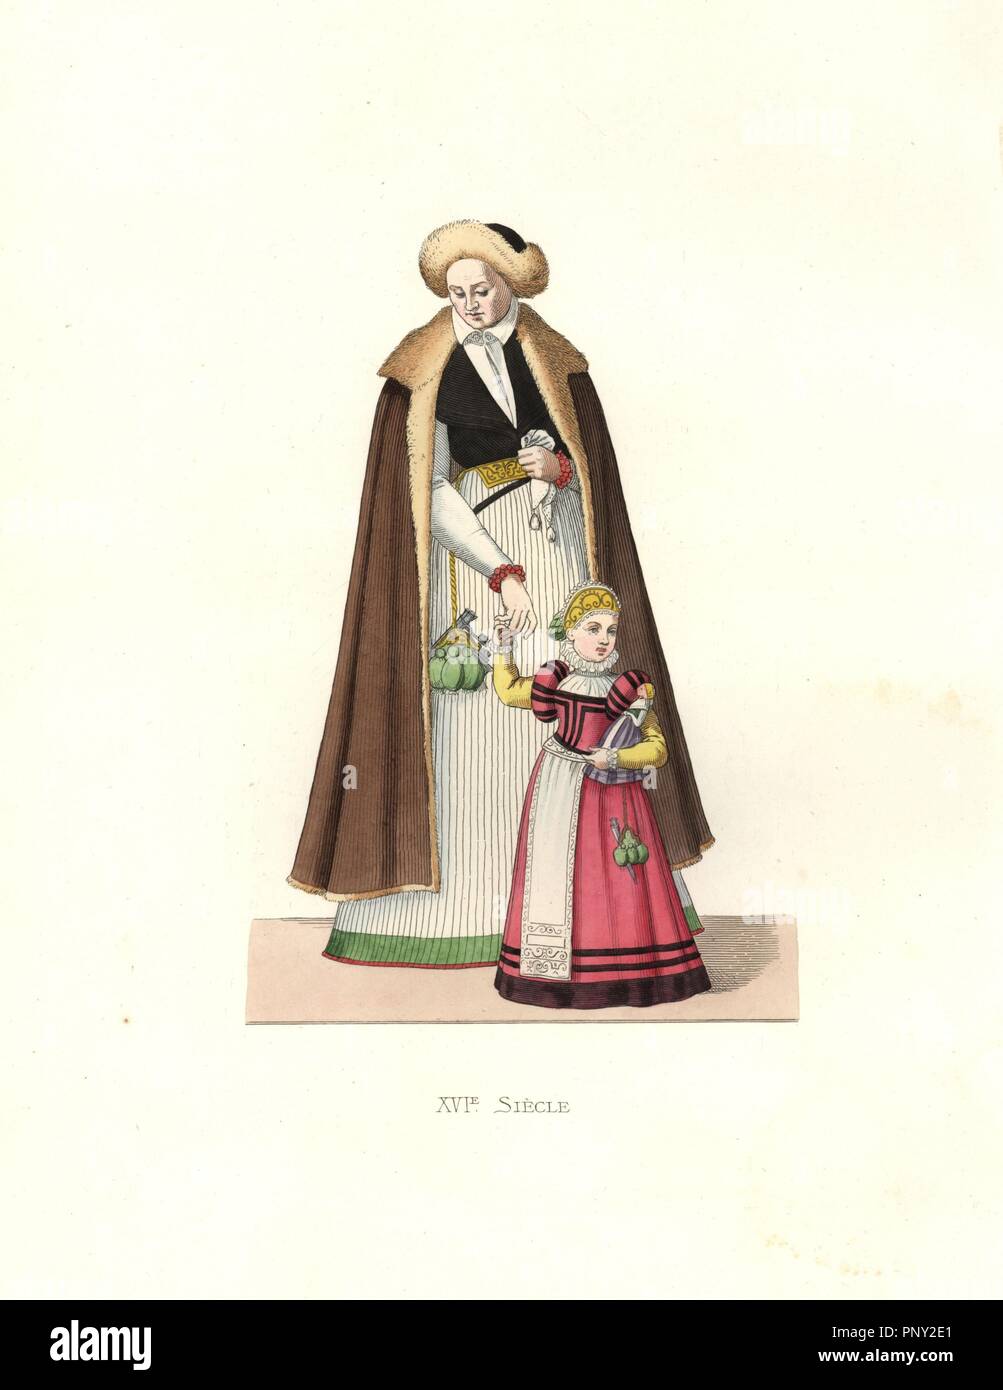 Woman of Silesia and girl, 16th century. The woman in brown bodice and long skirt, with a fur-lined brown coat and hat, the girl in pink bodice and skirt with apron and ruff, carrying a doll dressed the same.. Handcolored illustration by E. Lechevallier-Chevignard, lithographed by A. Didier, L. Flameng, F. Laguillermie, from Georges Duplessis's 'Costumes historiques des XVIe, XVIIe et XVIIIe siecles' (Historical costumes of the 16th, 17th and 18th centuries), Paris 1867. The book was a continuation of the series on the costumes of the 12th to 15th centuries published by Camille Bonnard and Pau Stock Photo